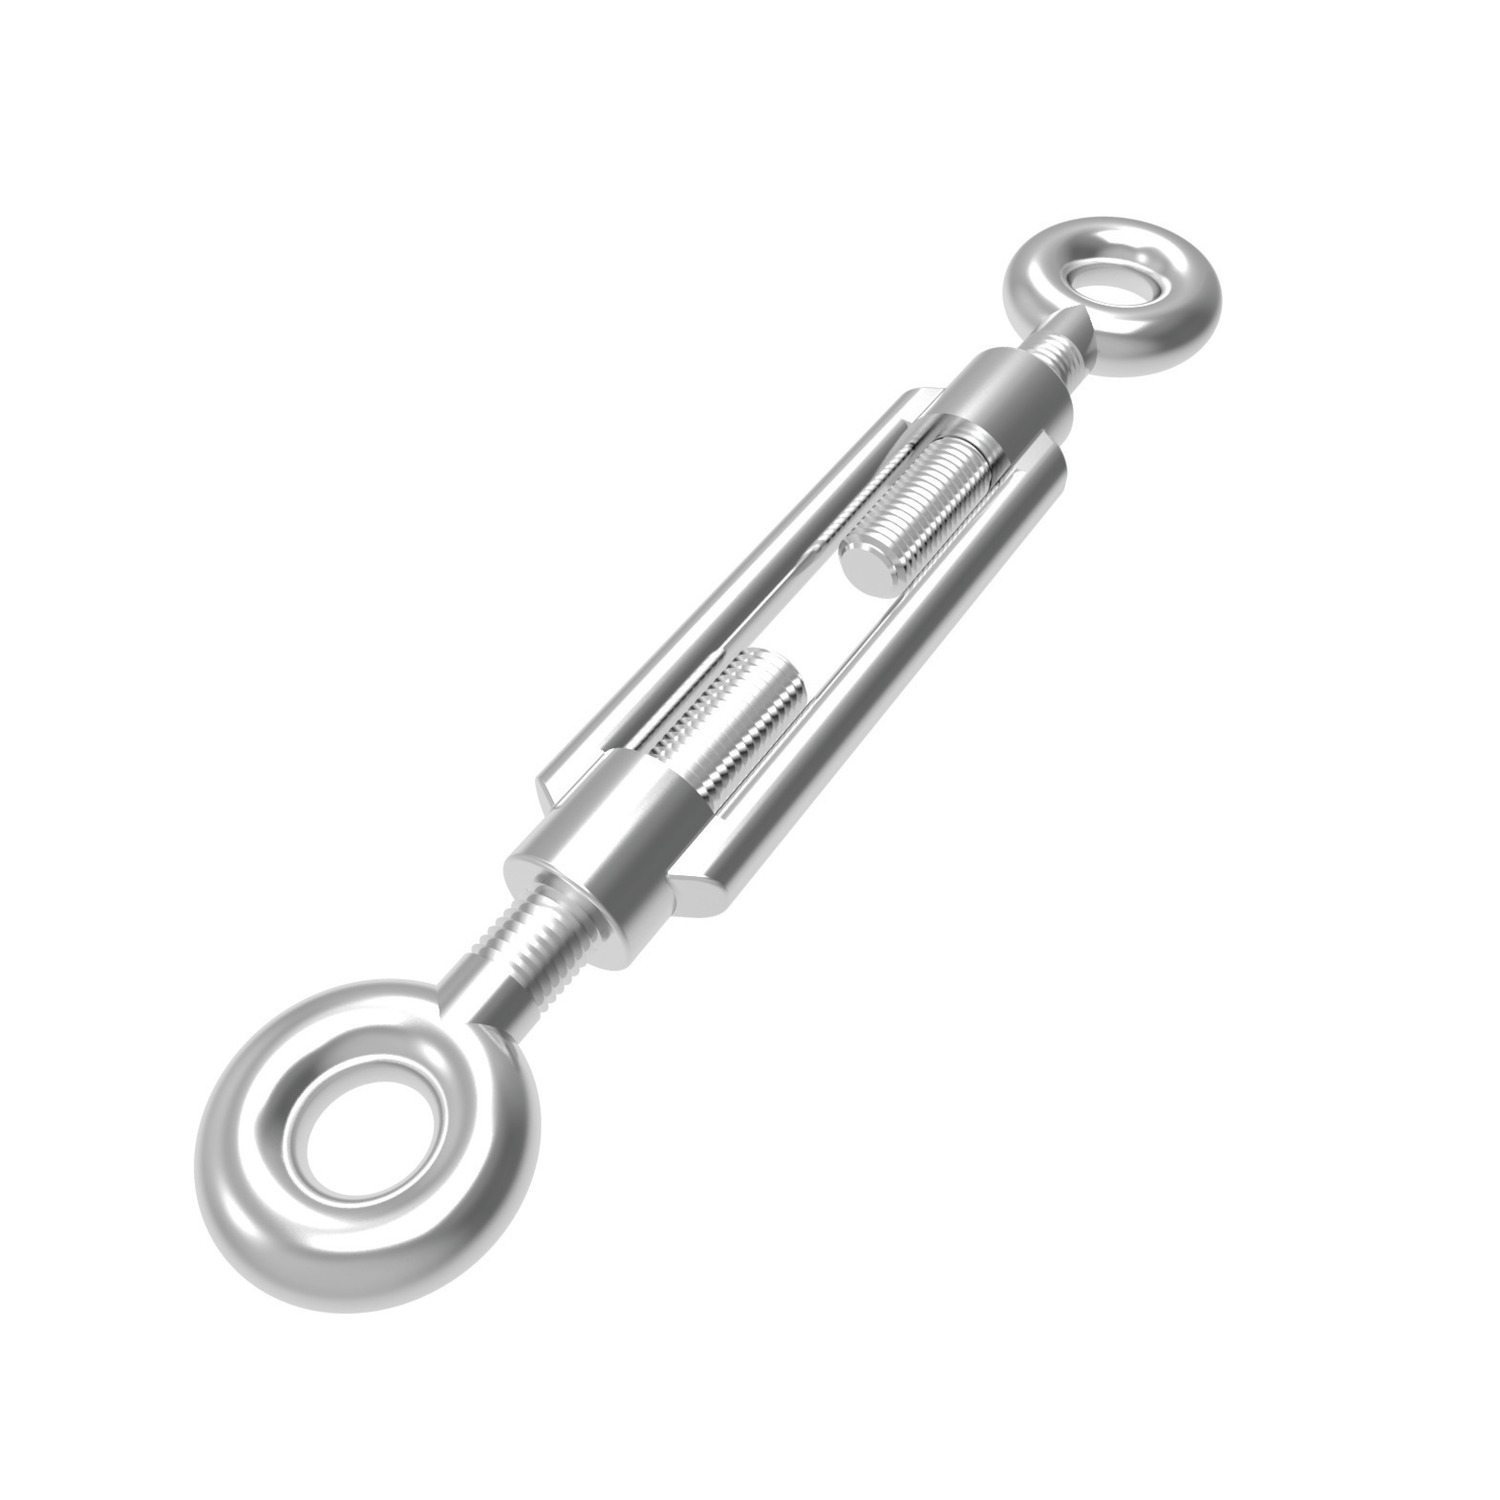 R3842.008-A4 Eye End Turnbuckles  M8 A4 s/s Not to be used for lifting unless SWL marked.